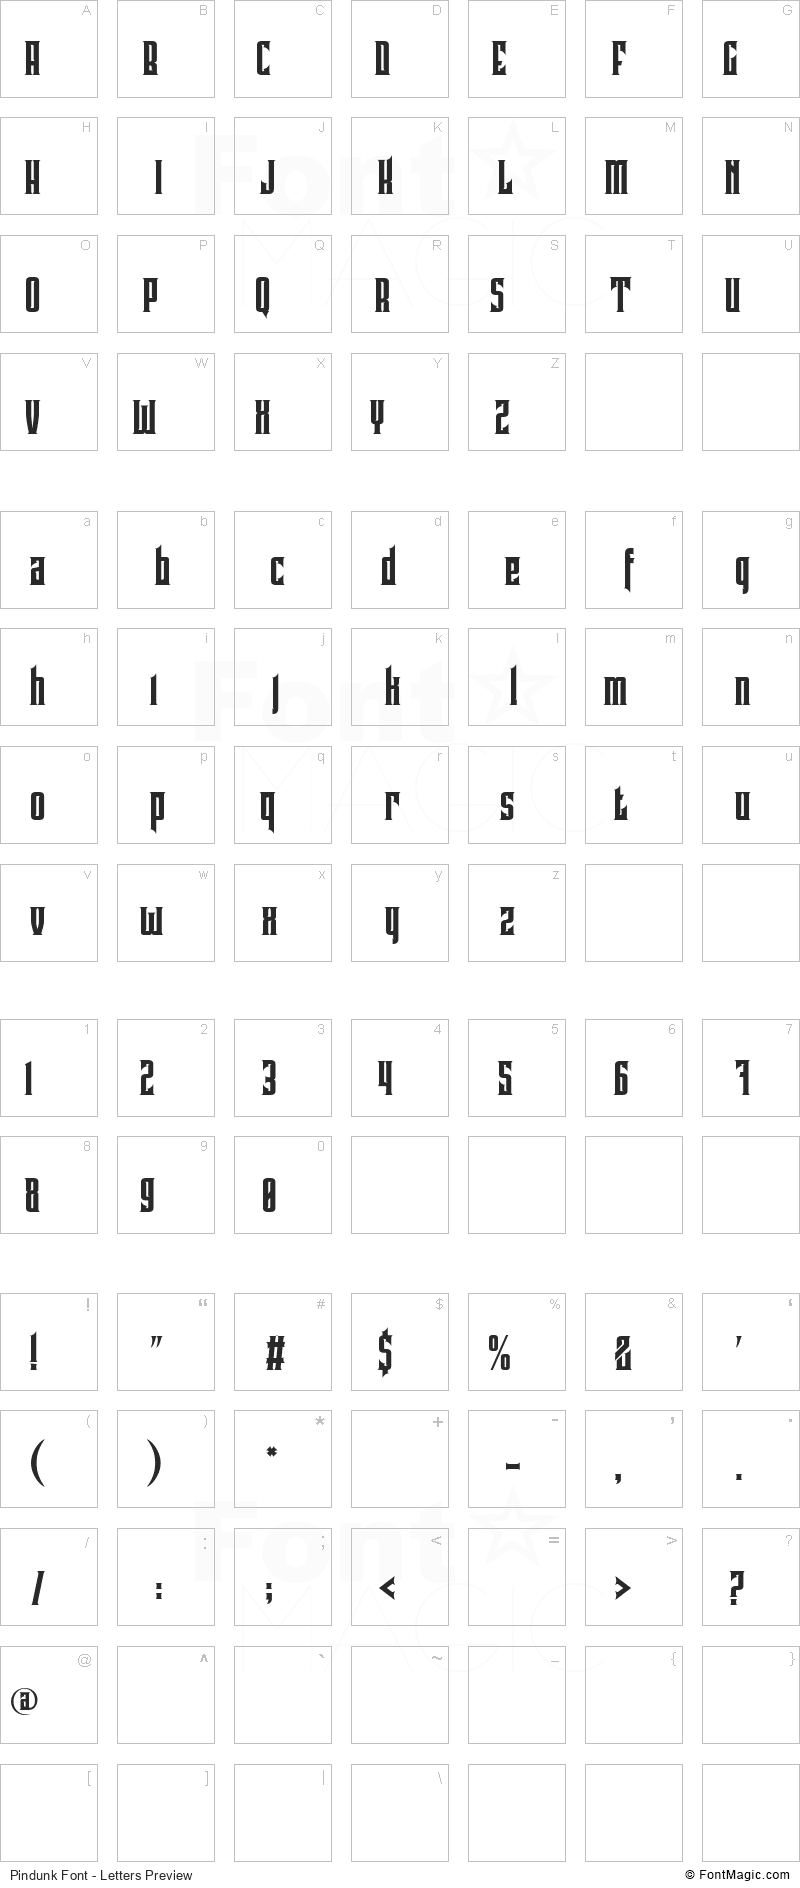 Pindunk Font - All Latters Preview Chart